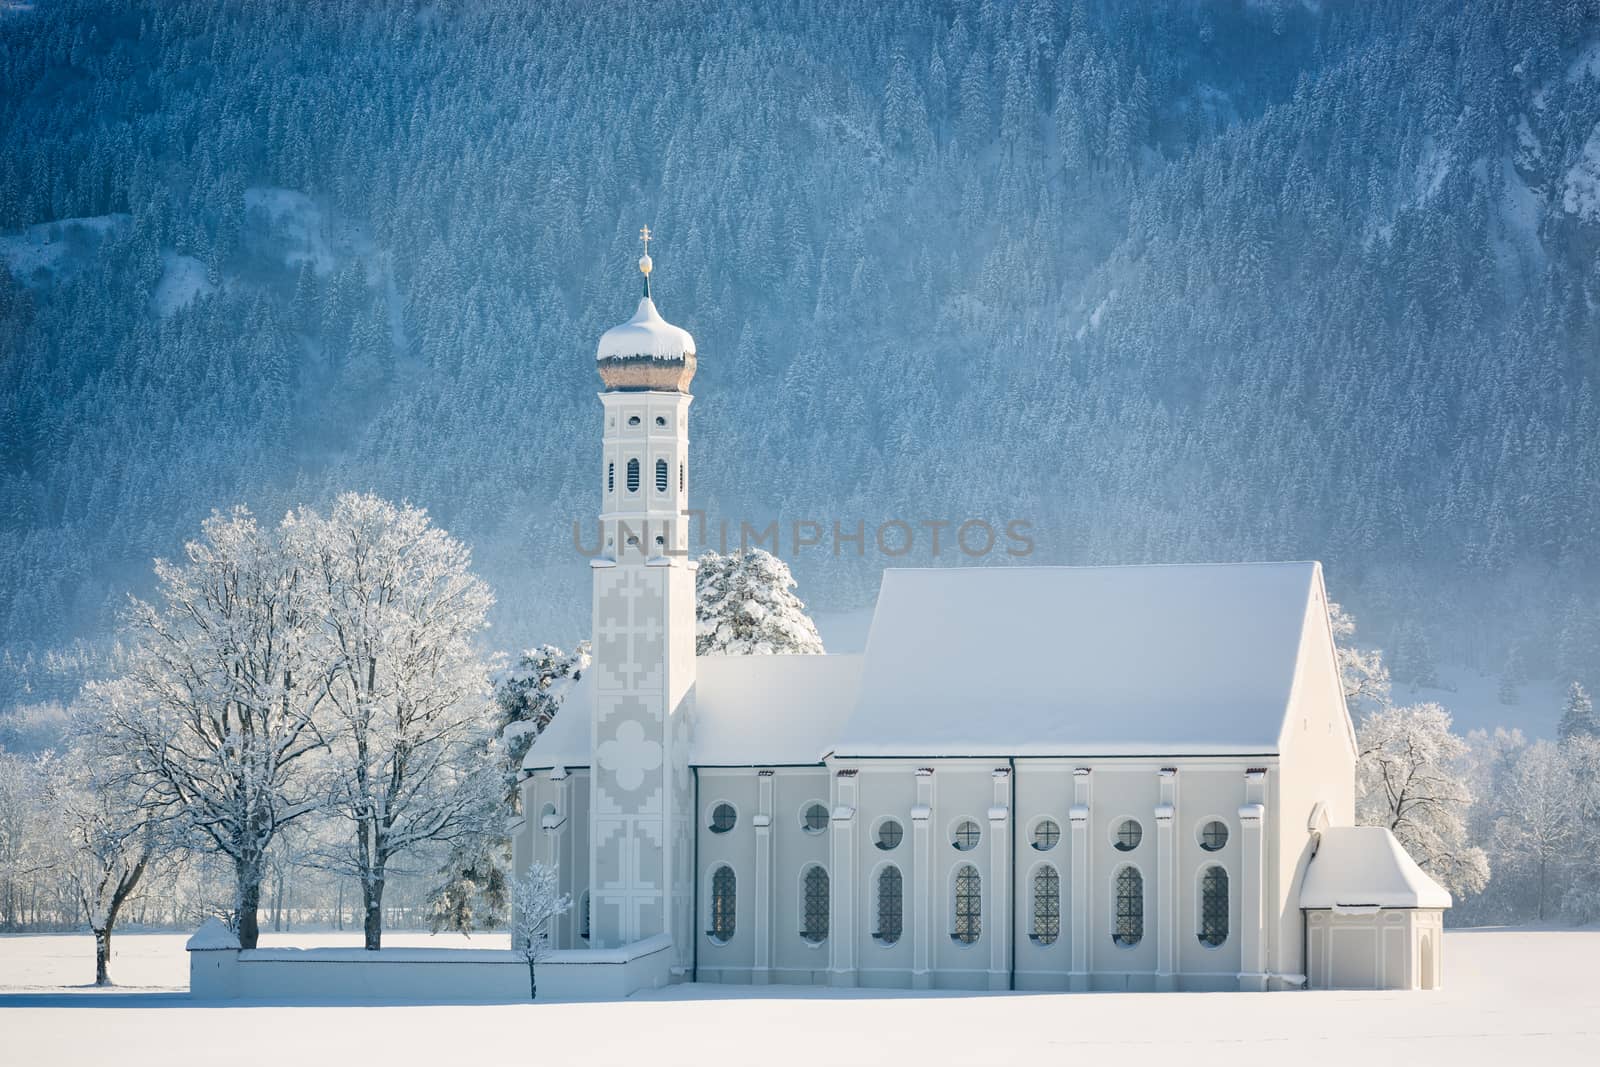 St. Coloman at wintertime, Allgau, Germany by fisfra